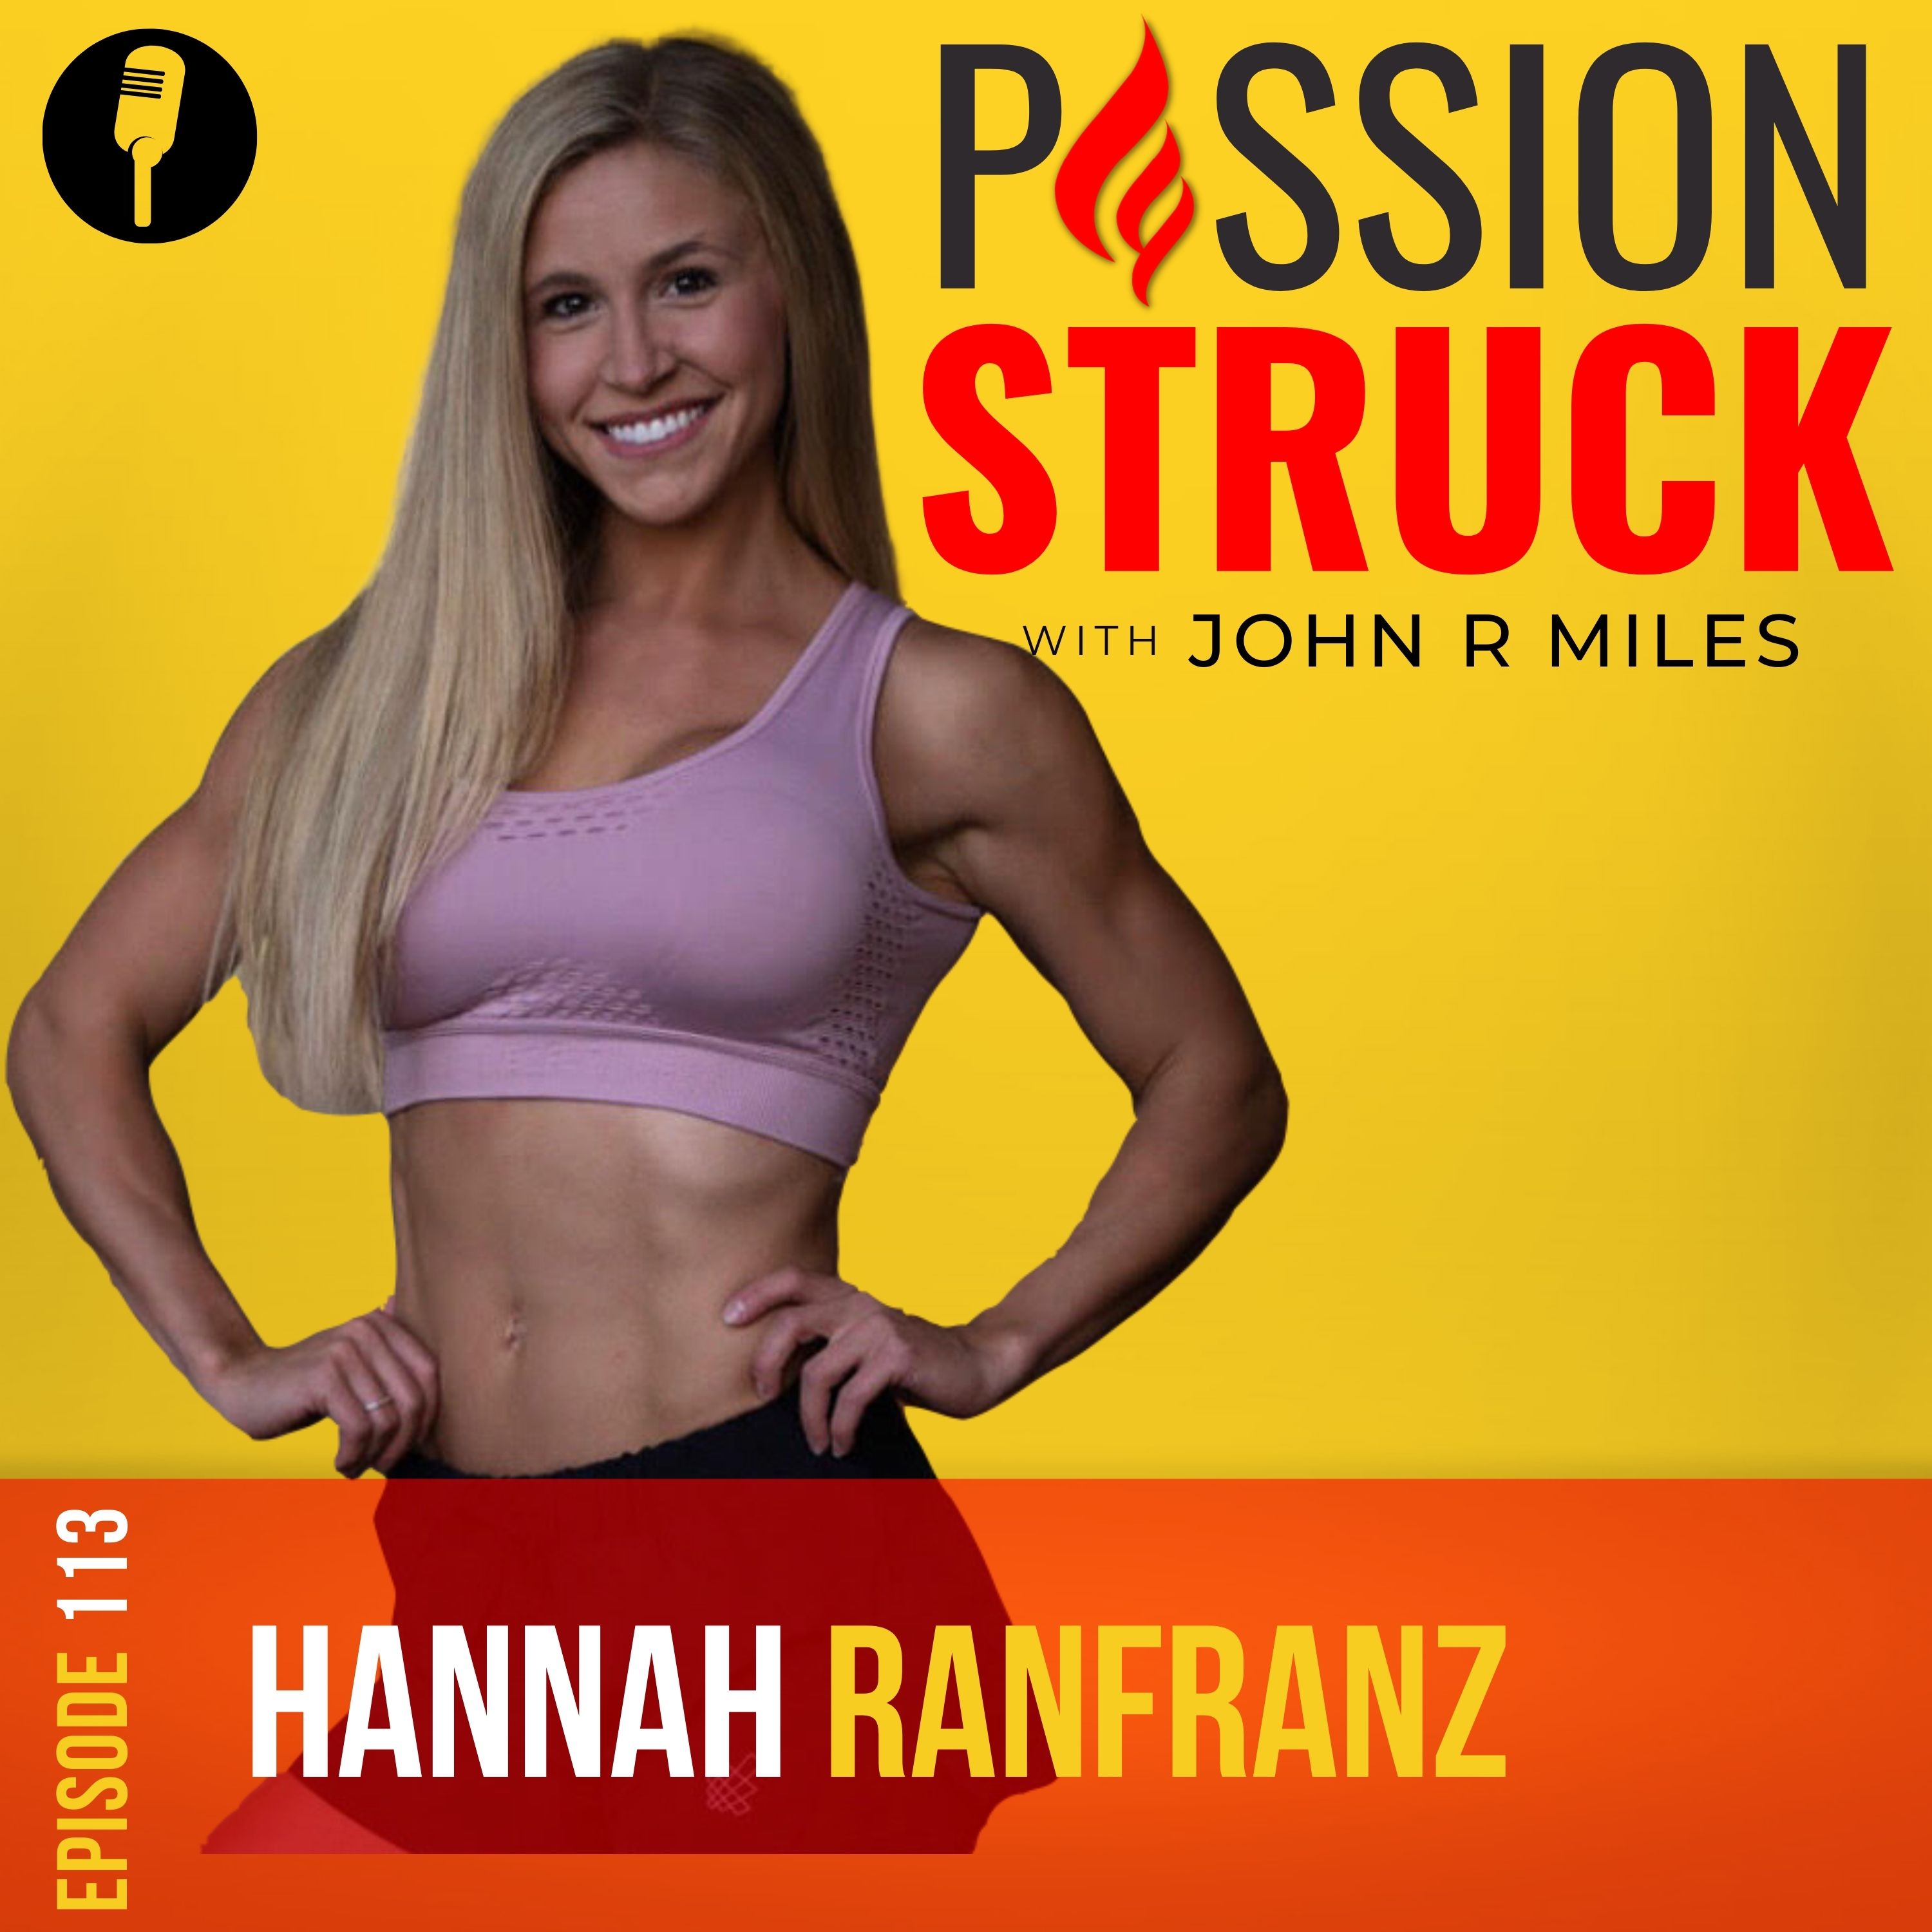 Passion Struck with John R. Miles album cover with Hannah Ranfranz episode 113